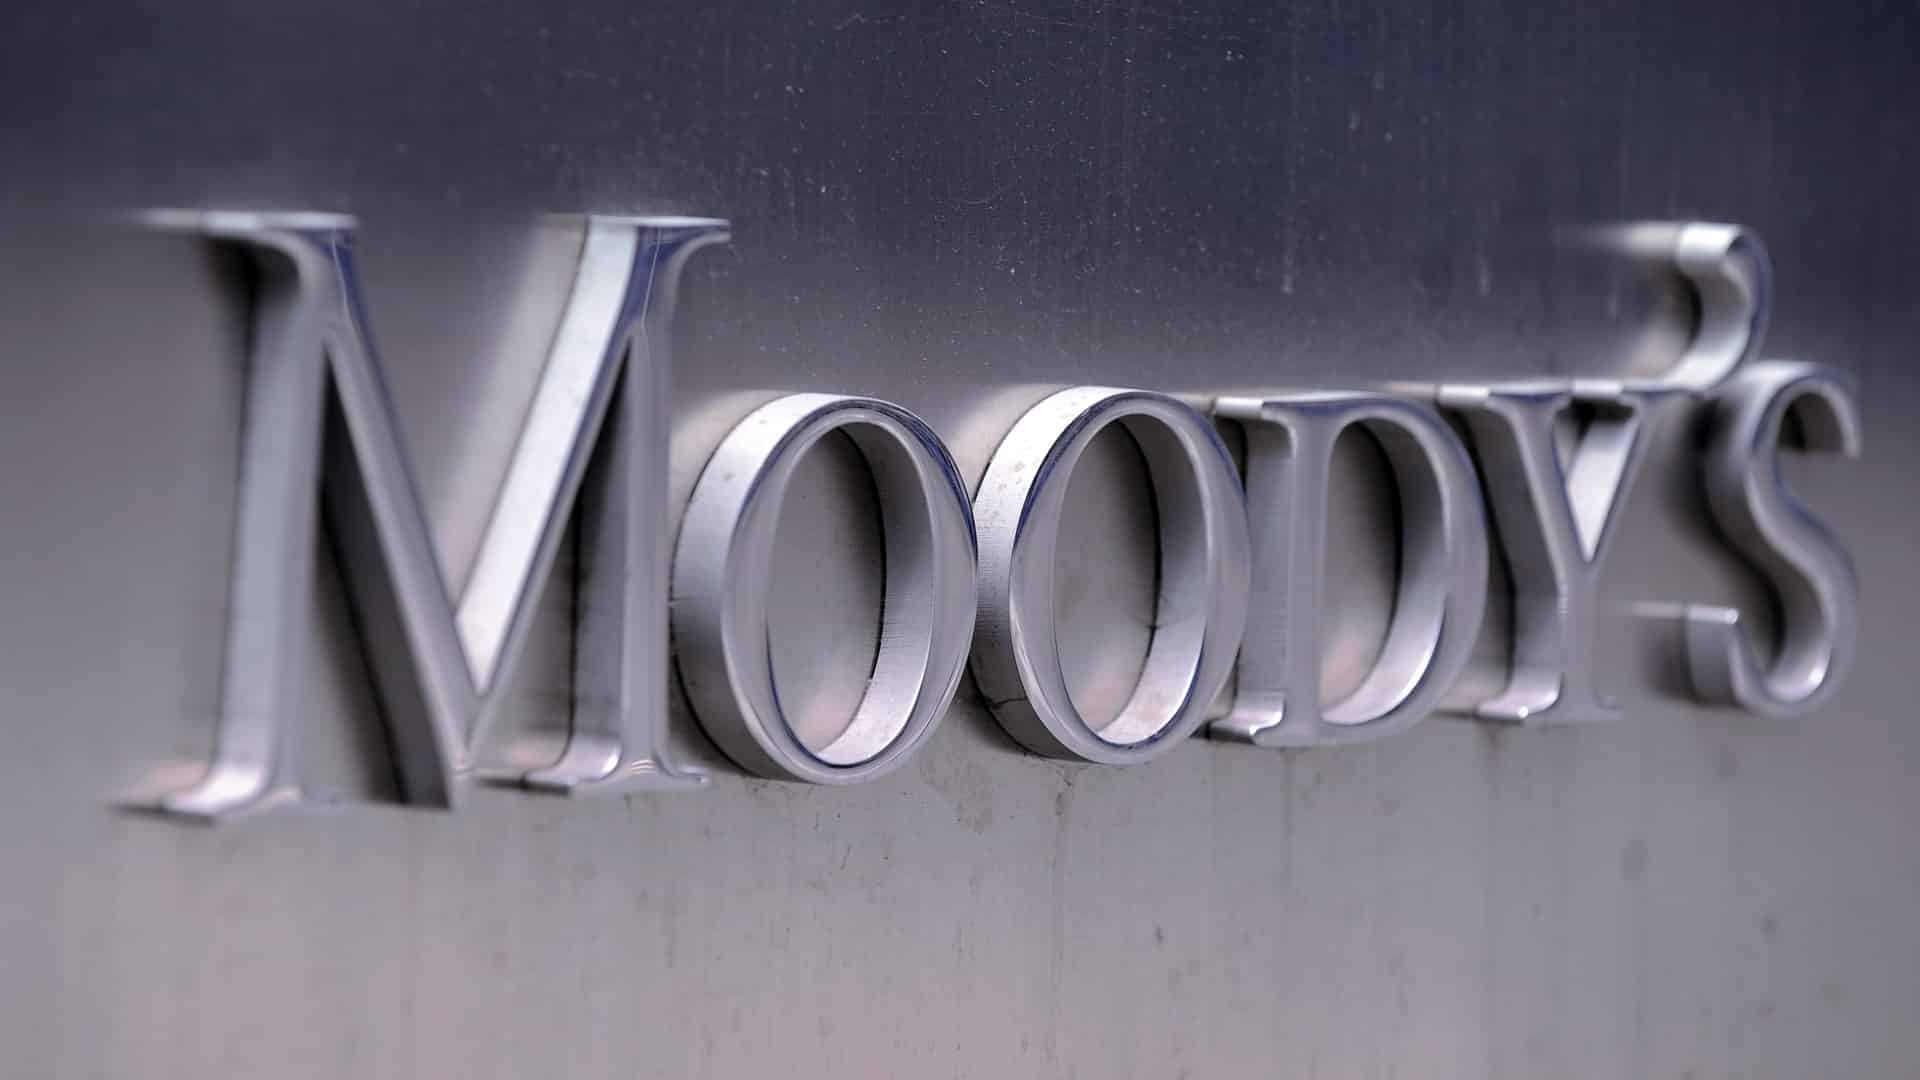 Moody's accords negative credit outlook to countries on high prices, slowing growth